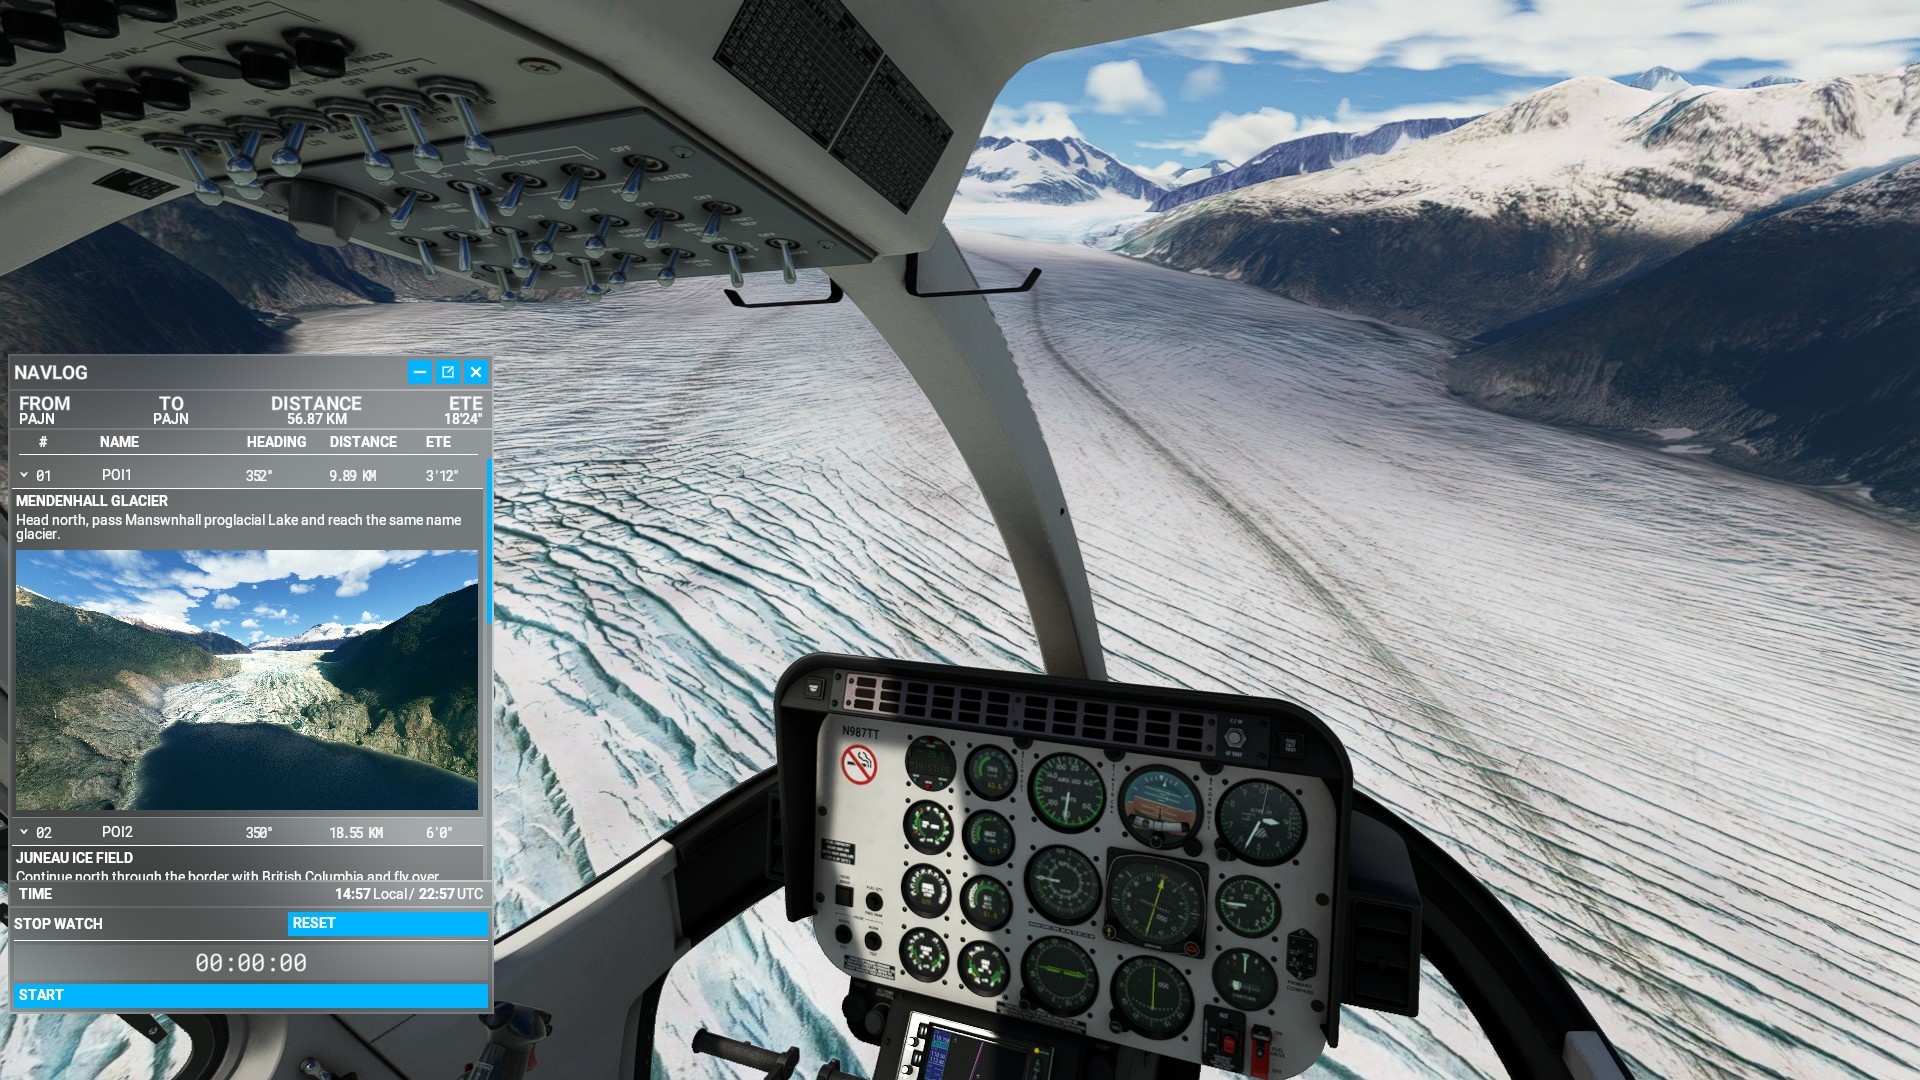 (The Heli Trip to Mendenhall Glacier is a mission that was first available in FS2004 and is now available in MSFS 2020.)